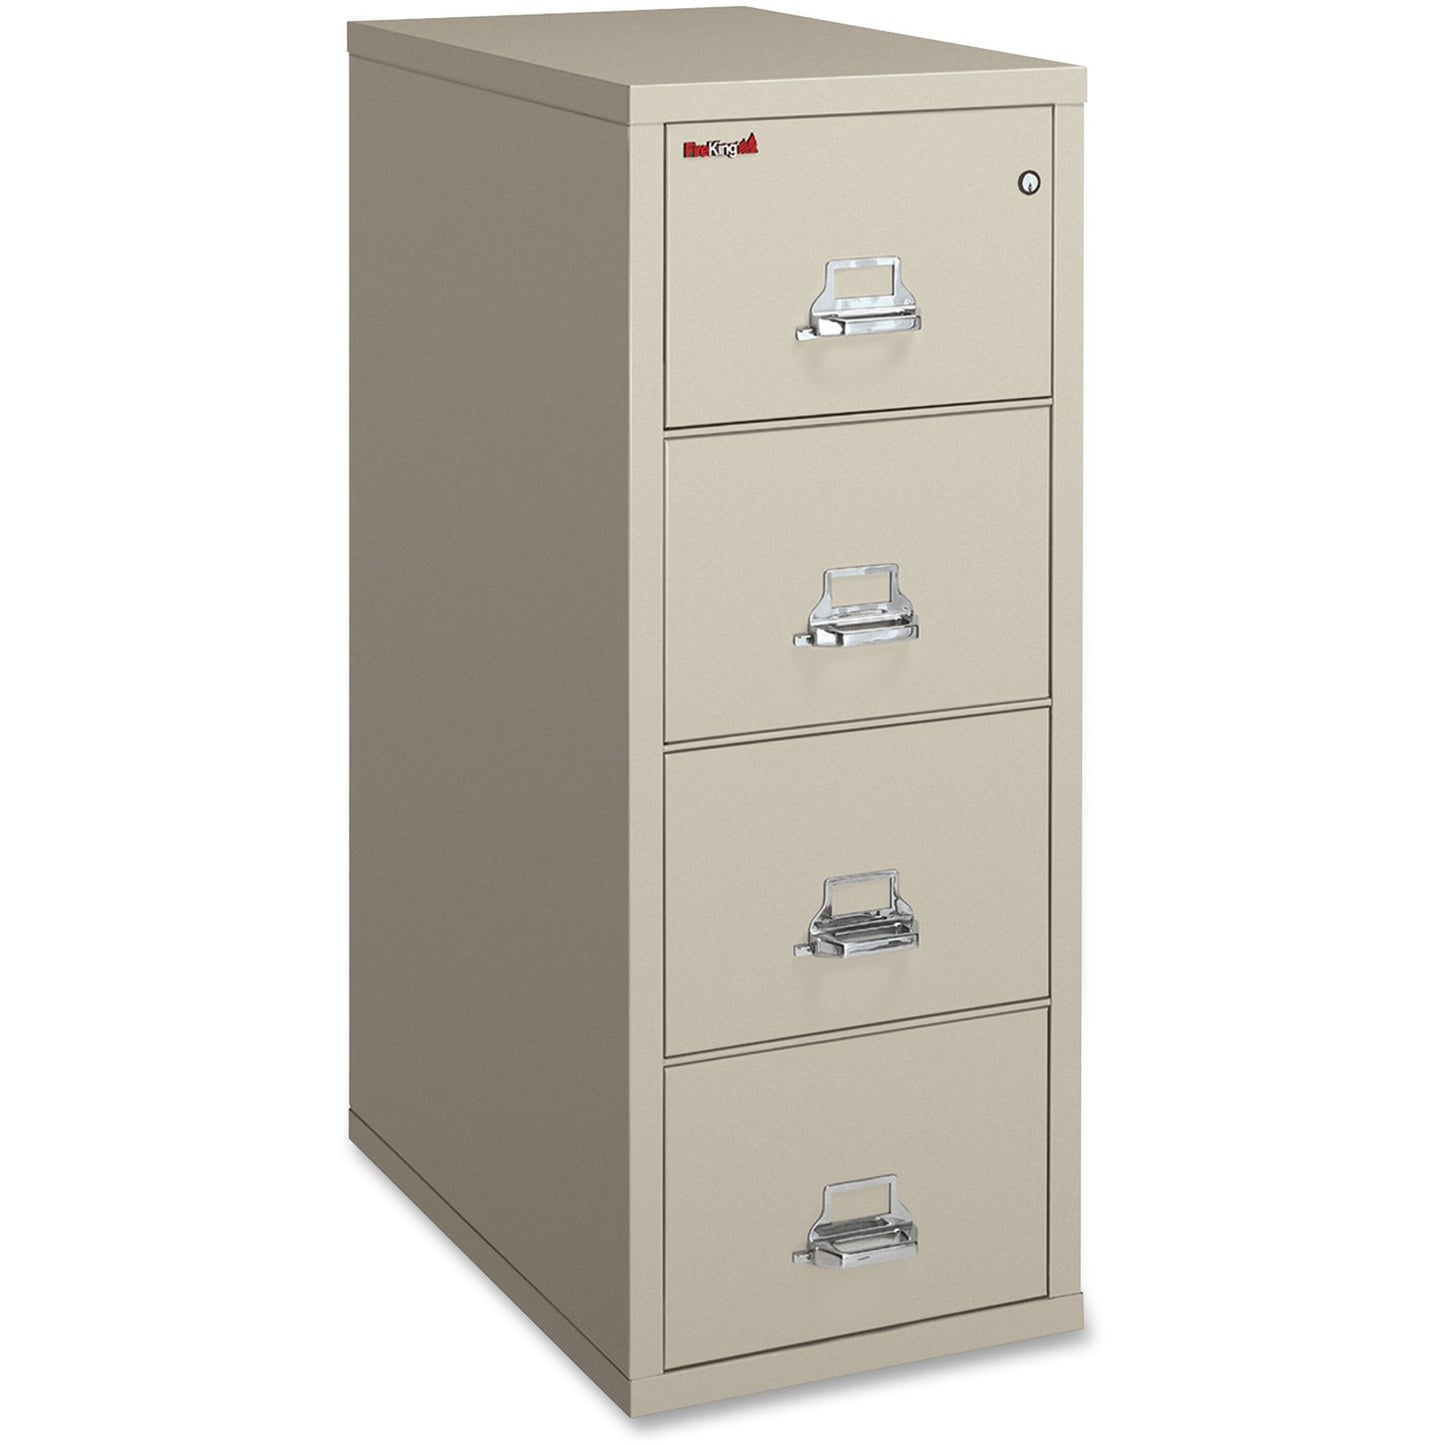 FireKing Fireproof Classic High Security Vertical File Cabinet- 4 Drawer | 4-2131-C |